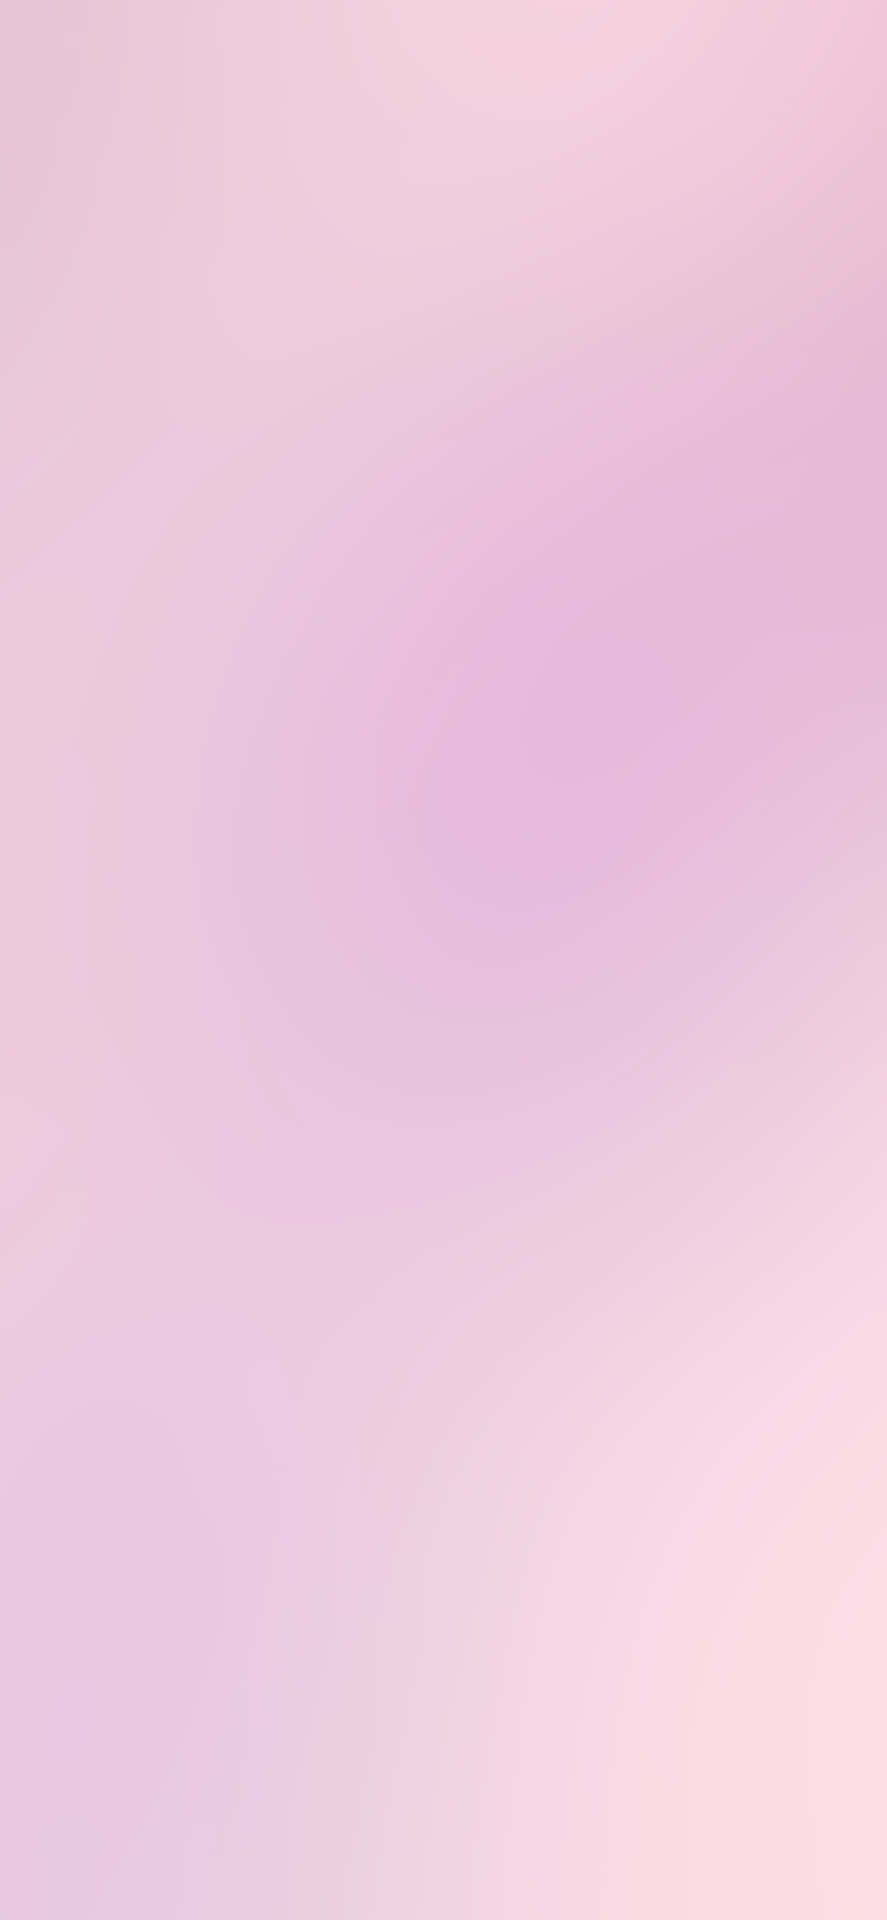 Download A Pink And Purple Background With A White Arrow Wallpaper ...